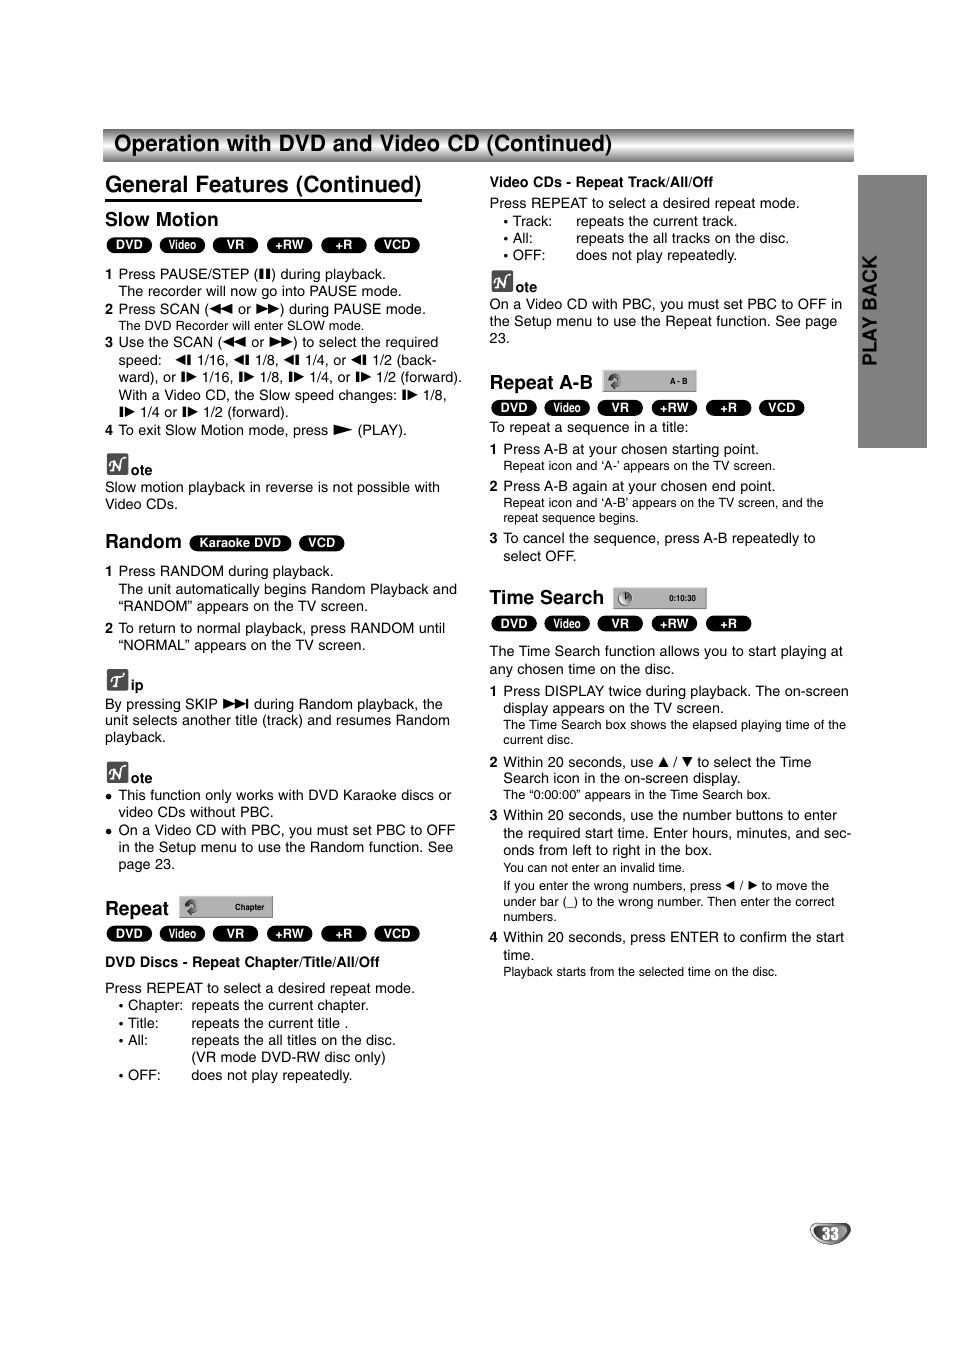 Pla y back, Slow motion, Random | Repeat, Repeat a-b, Time search | LG DR4912 User Manual | Page 33 / 64